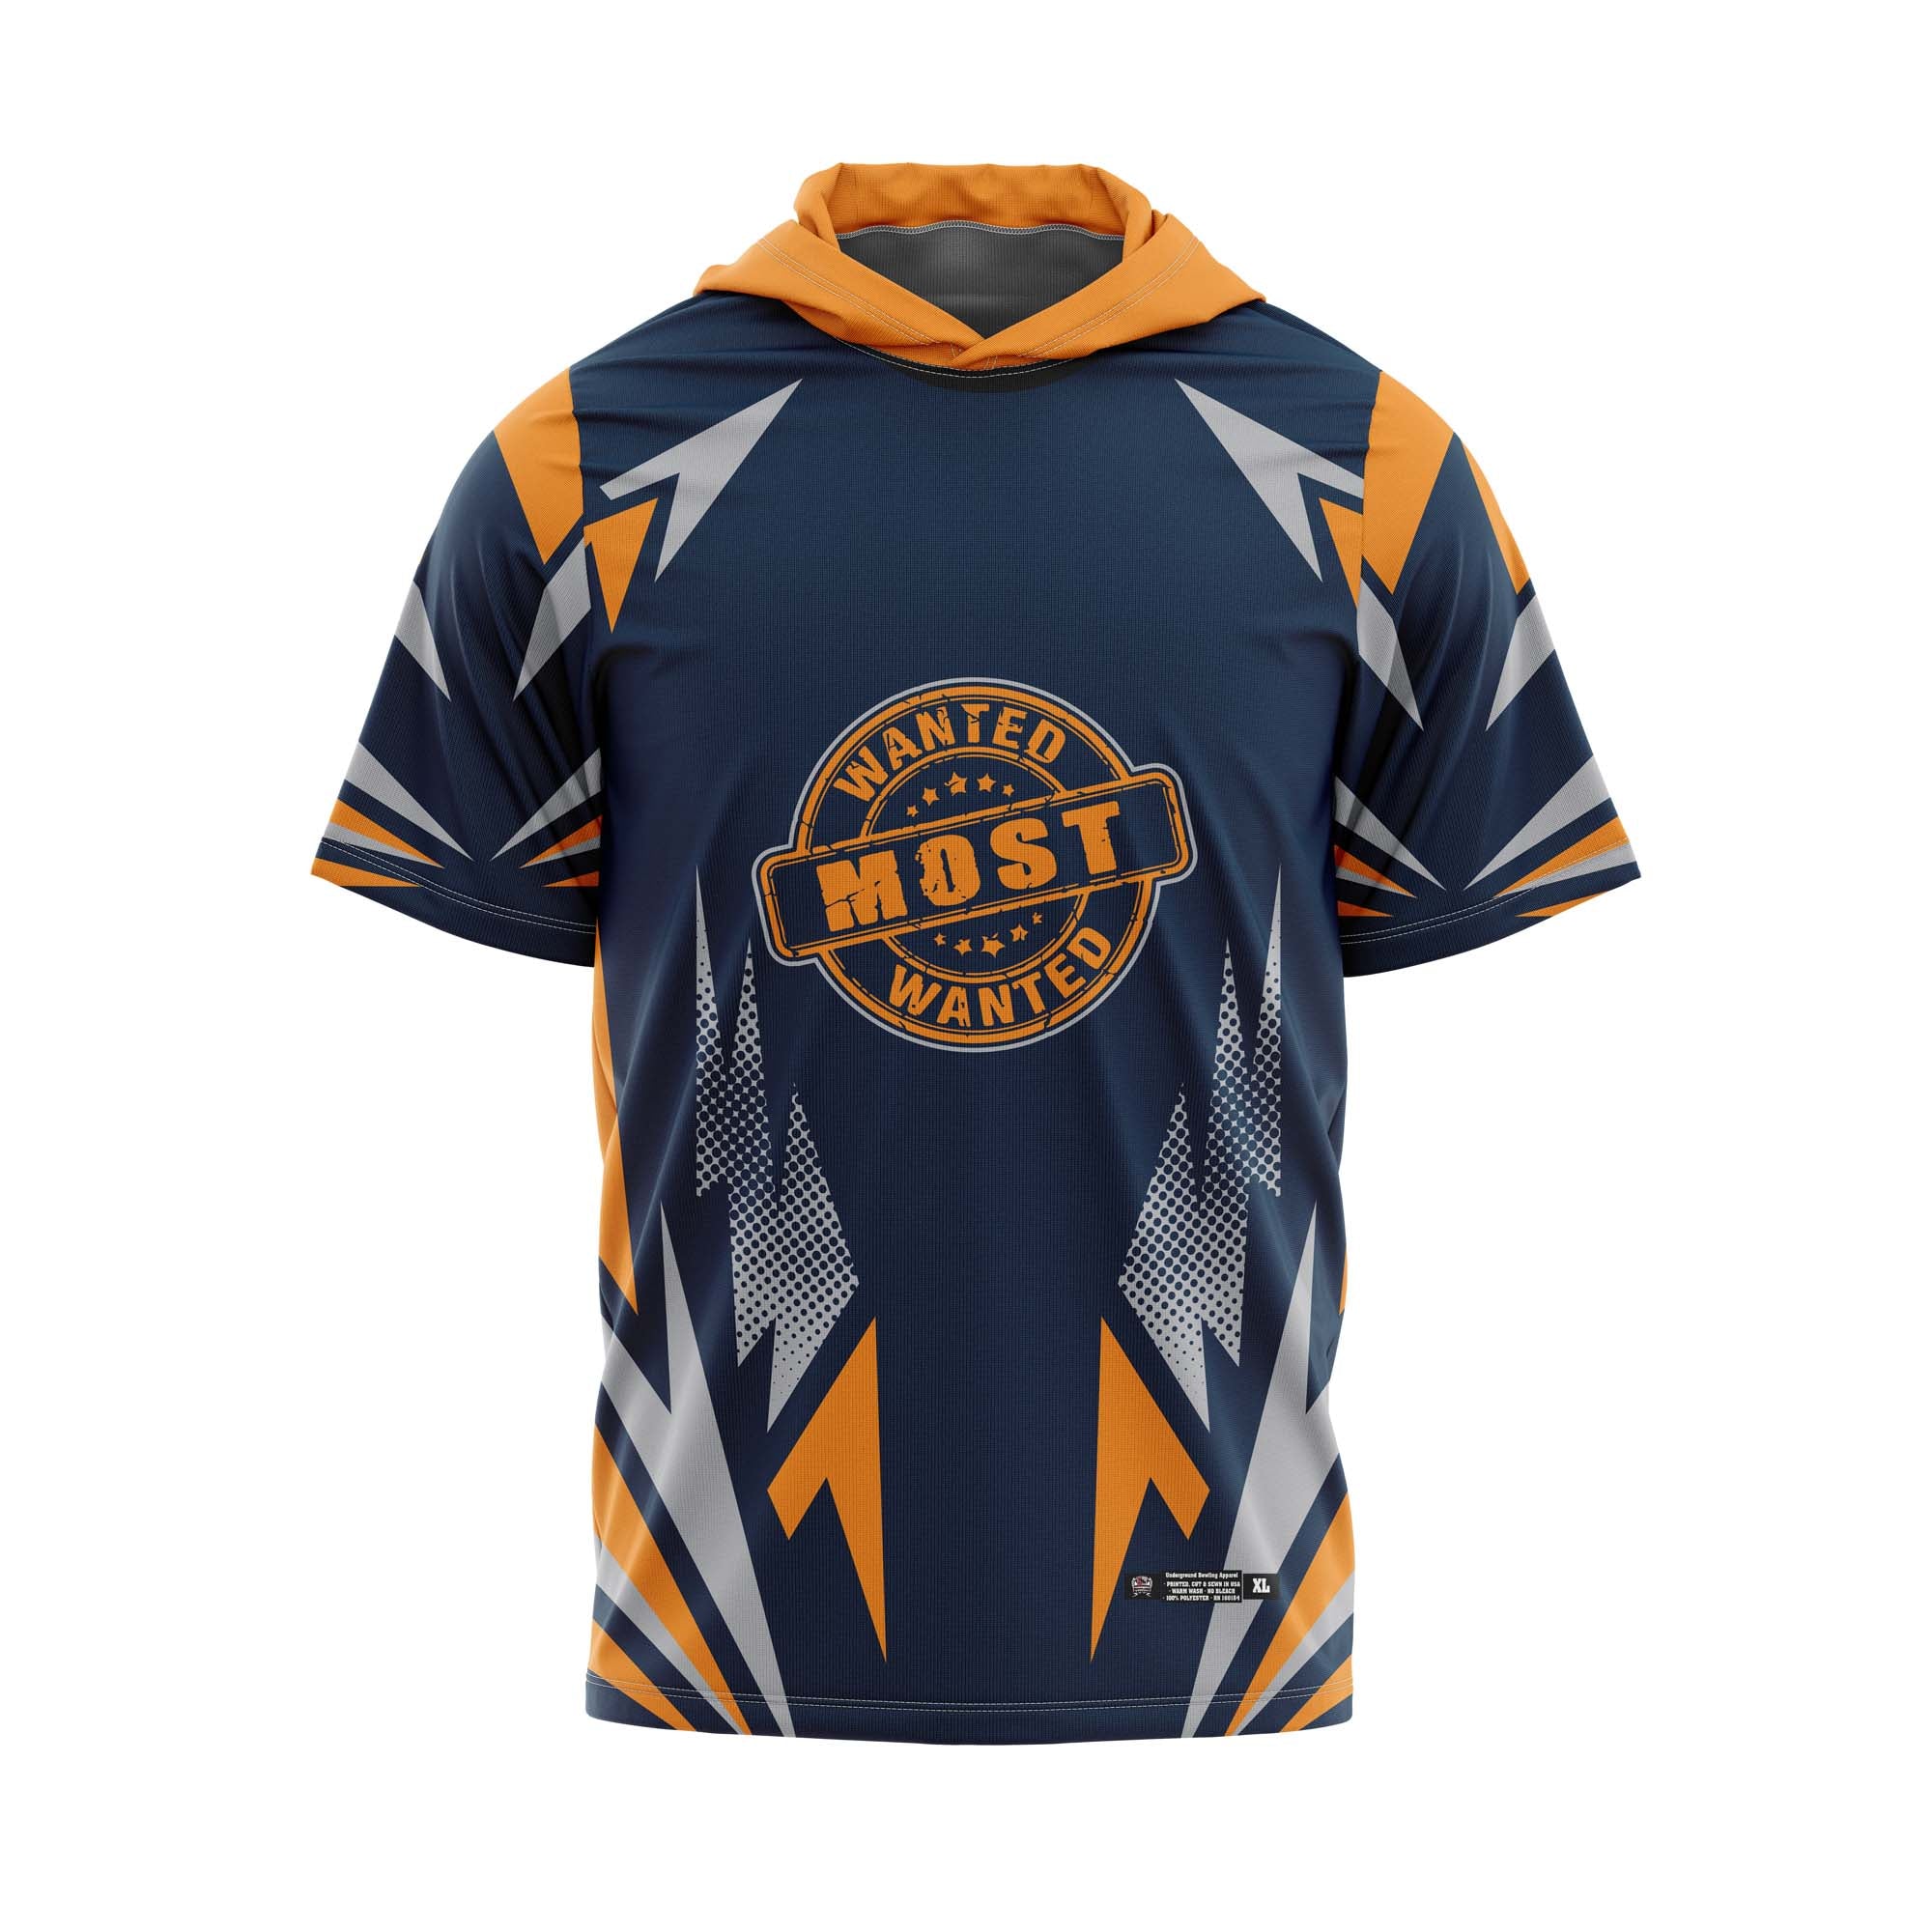 Most Wanted Home / Main Jersey